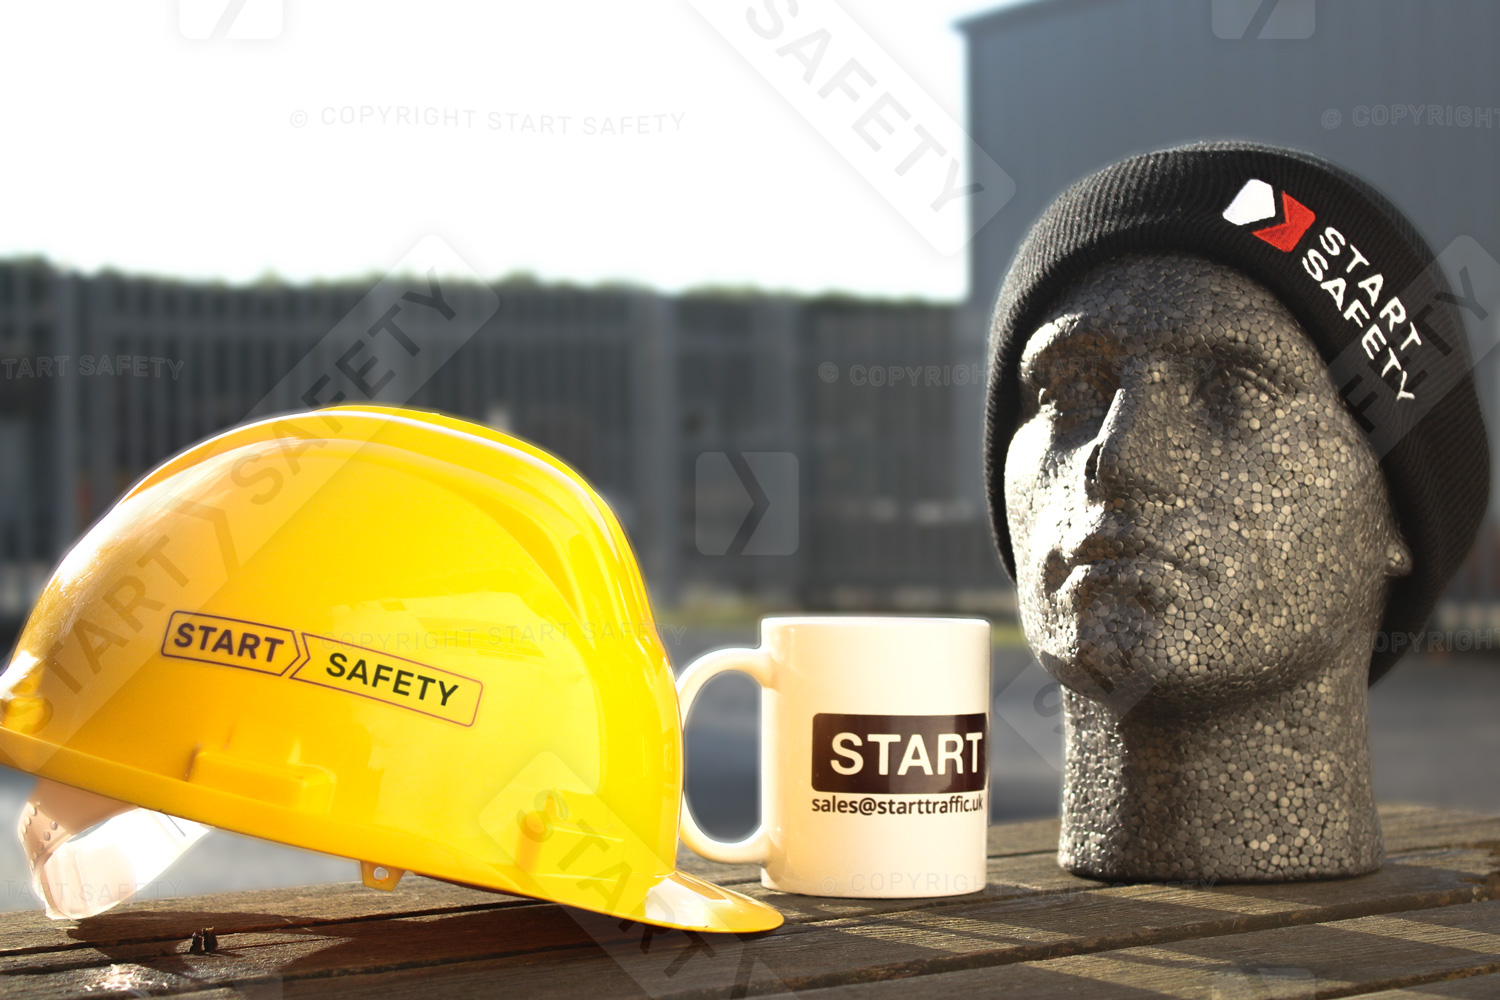 Start Safety Branded Hard Hat, Beanie And Coffee Cup